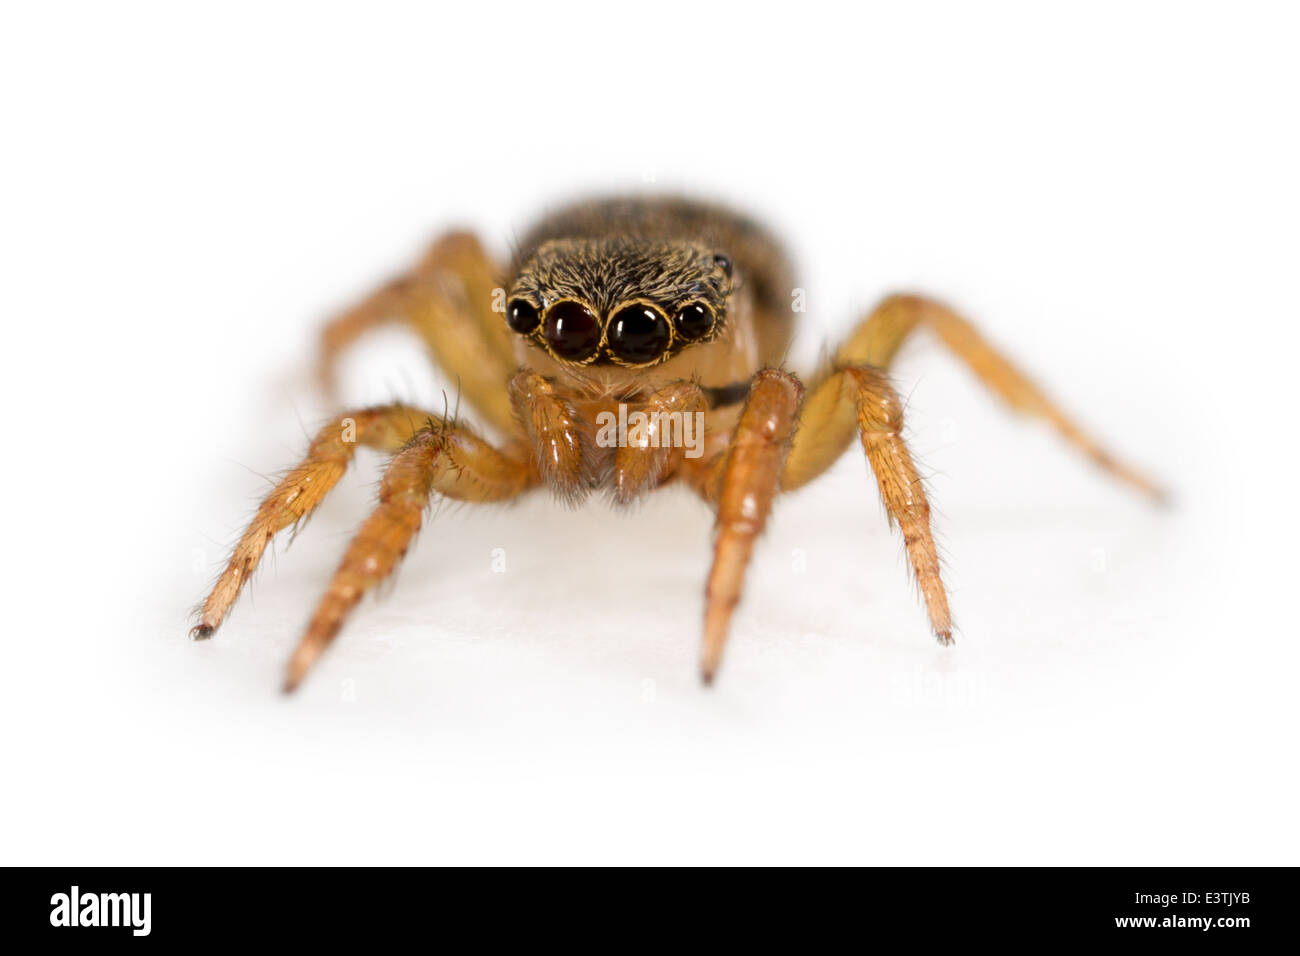 Female Euophrys frontalis spider, part of the family Salticidae - jumping spiders. Isolated on white background. Stock Photo